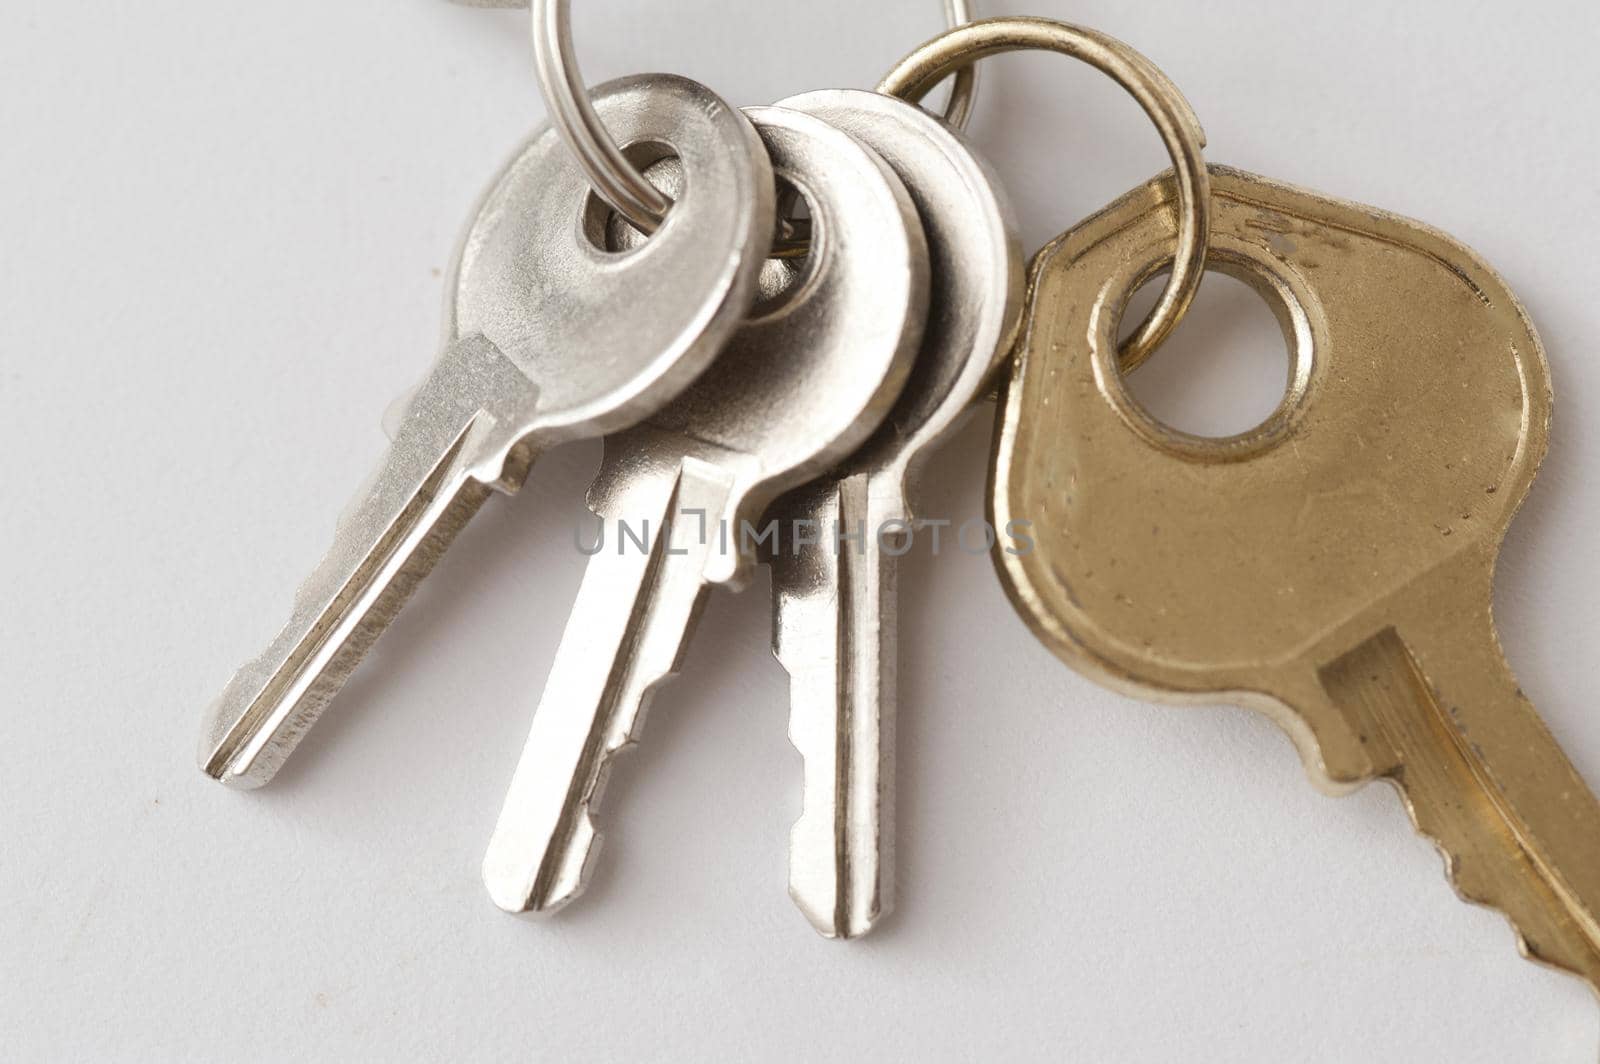 Security Concept - Close up Luggage Keys on a Ring , on Off White Background.